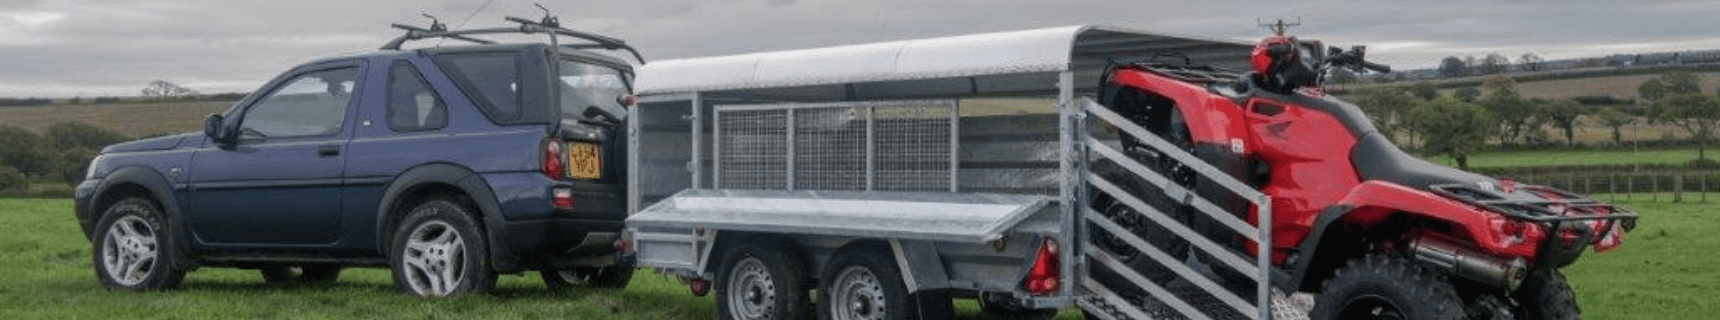 CLH Flatbed Trailers Head Image